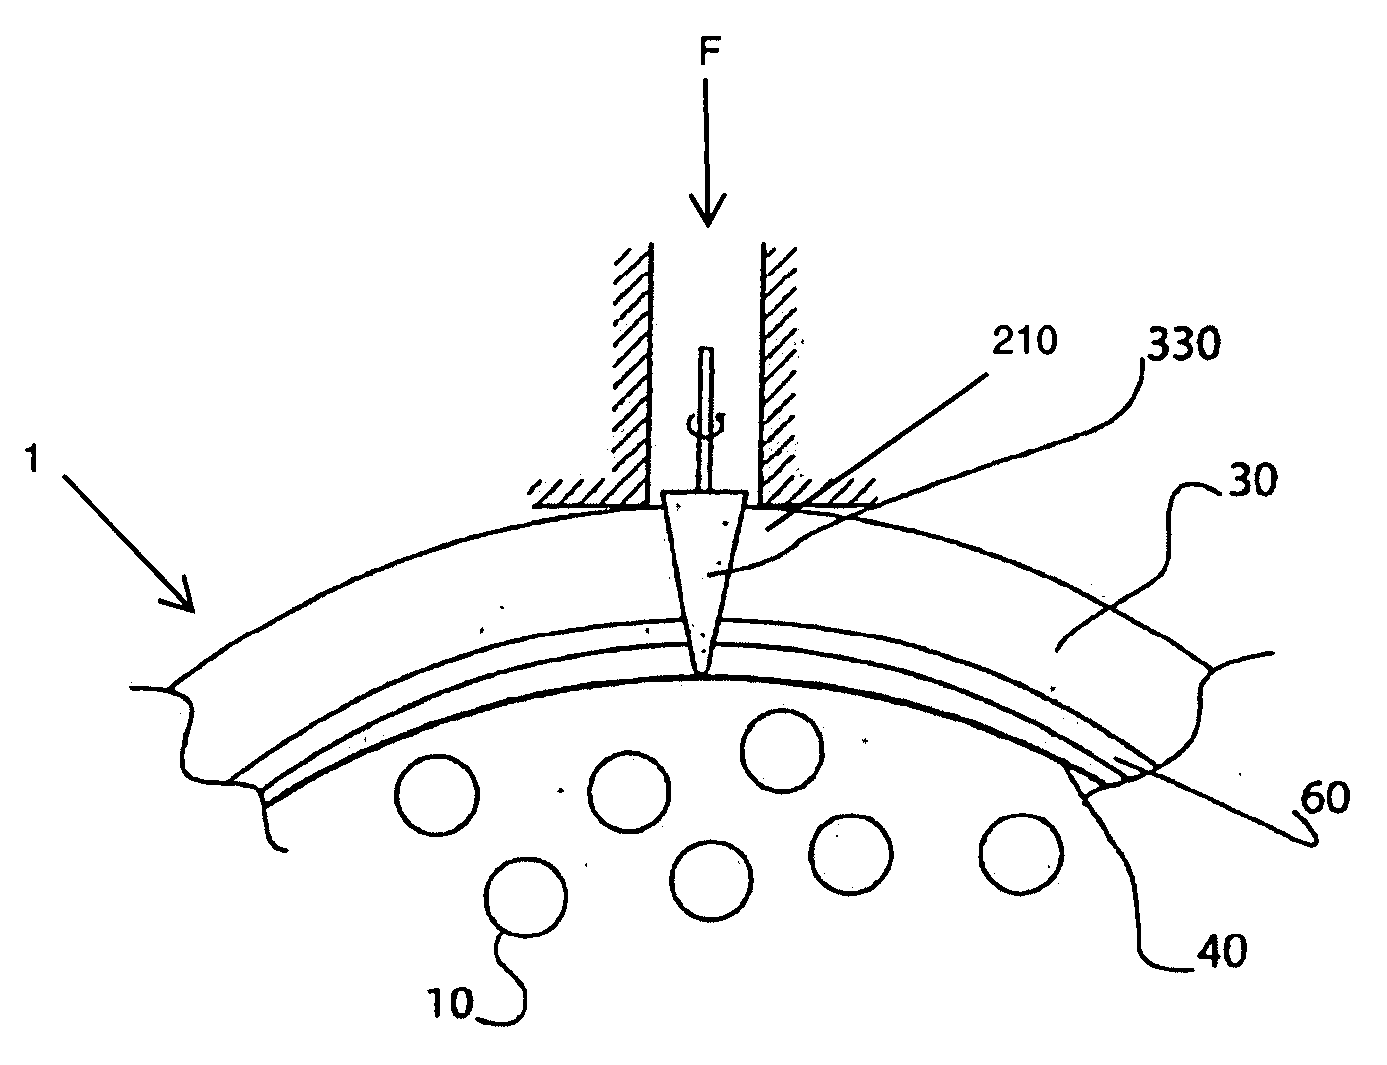 Method for Accessing Optical Fibers within a Telecommunication Cable